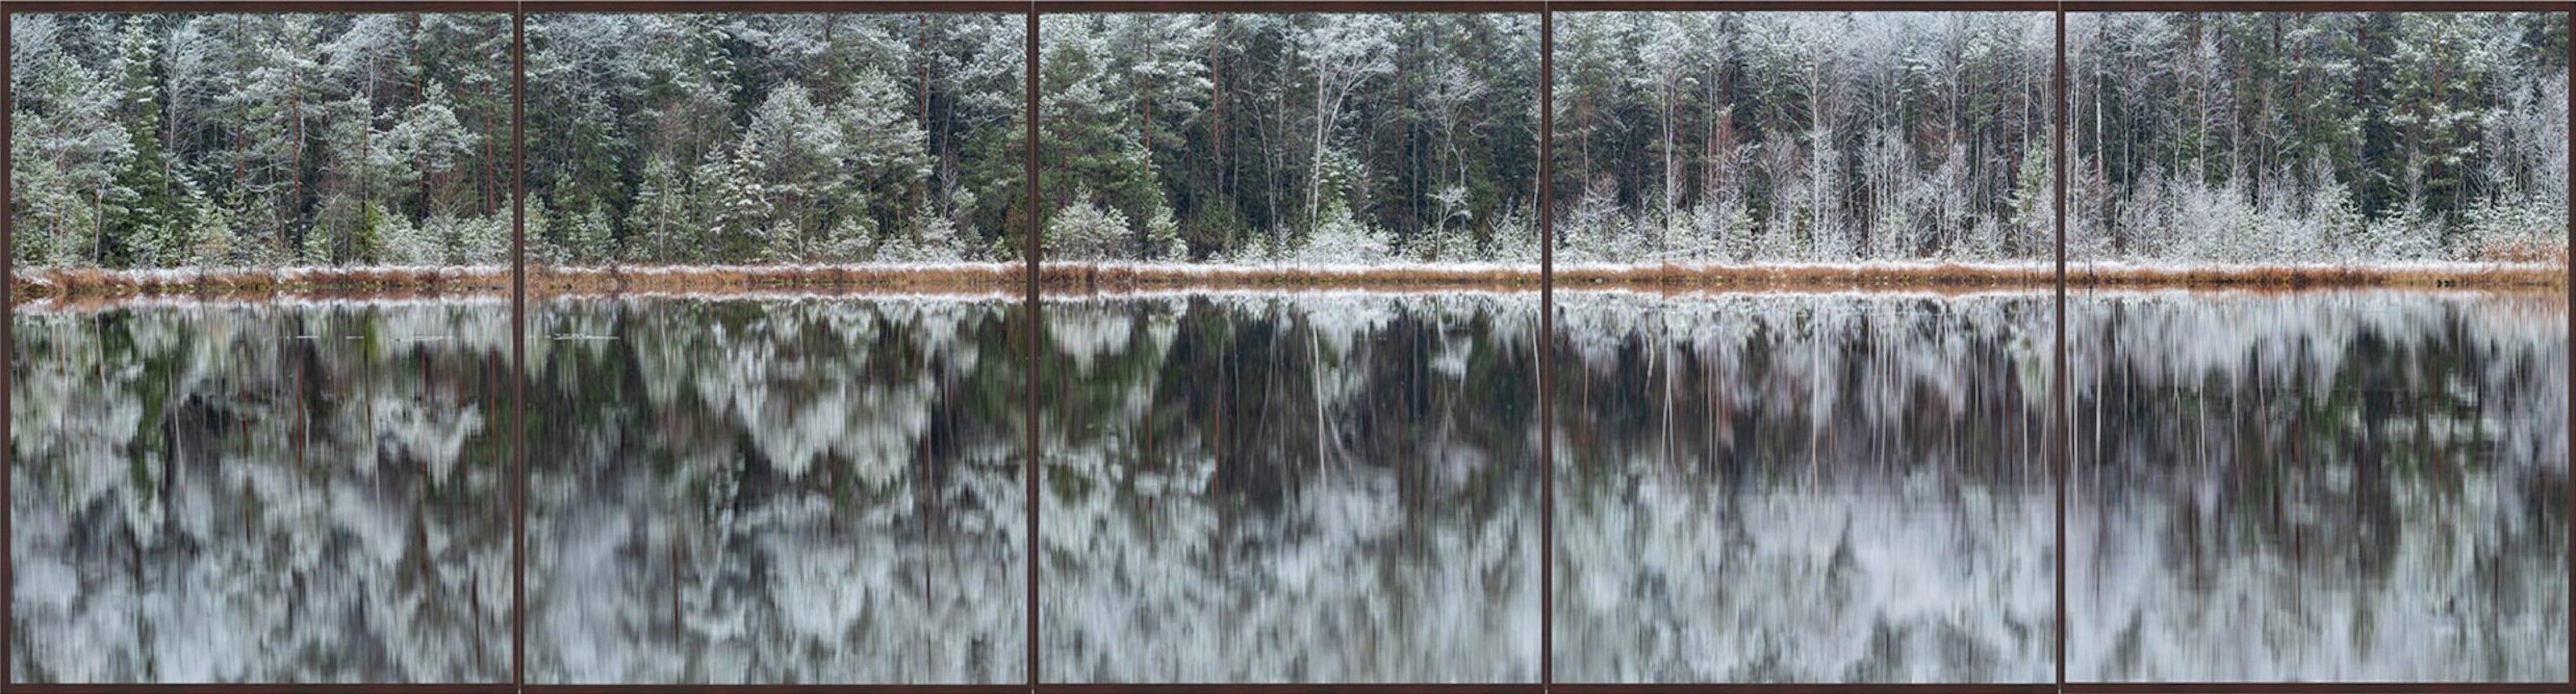 Deep Mirroring Forest 007 is a limited-edition photograph by German contemporary artist Bernhard Lang. 

This photograph is sold unframed as a print only. It is available in 5 dimensions:
*30 × 112 cm (11.8 × 44.1 in), edition of 5 copies
*40 × 150